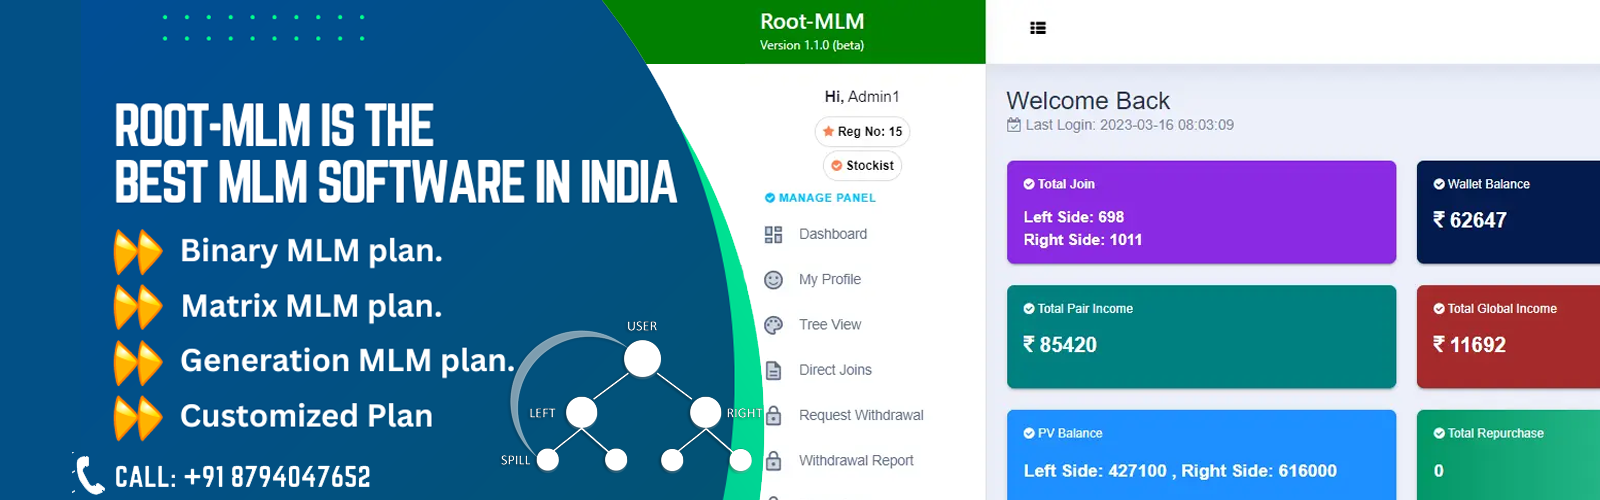 Root-MLM is the best Multi-level Marketing (MLM) Software in India